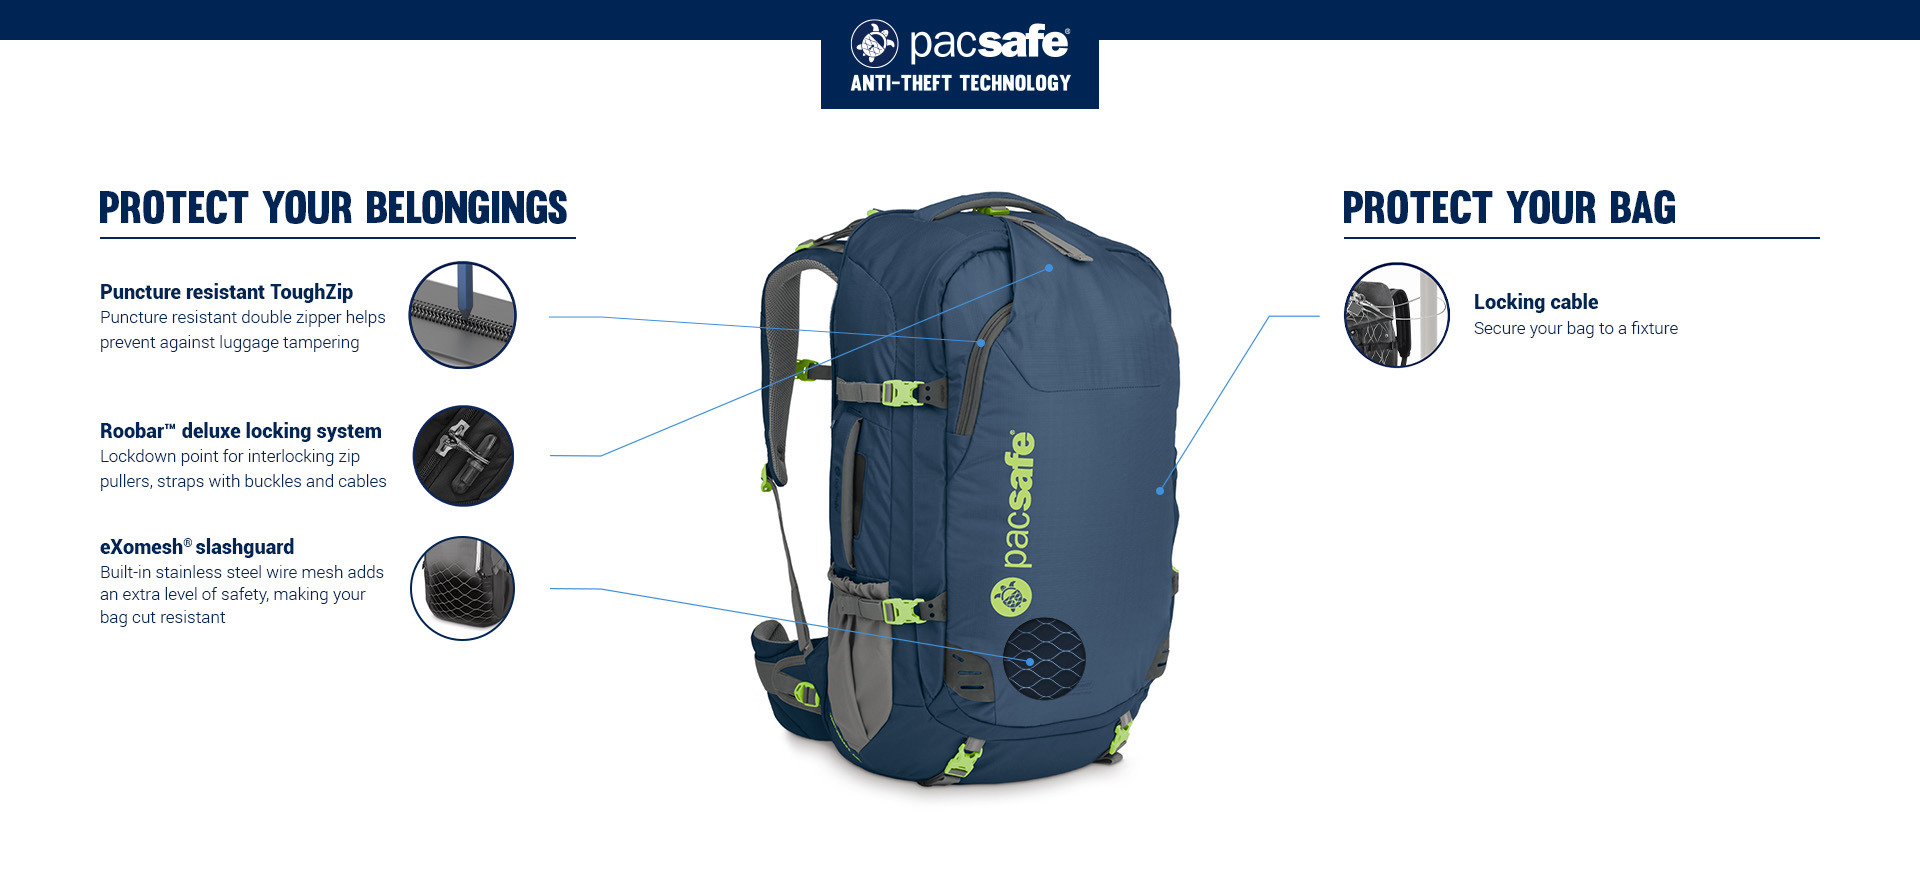 pacsafeph on Instagram: As Pacsafe's second product launch, the